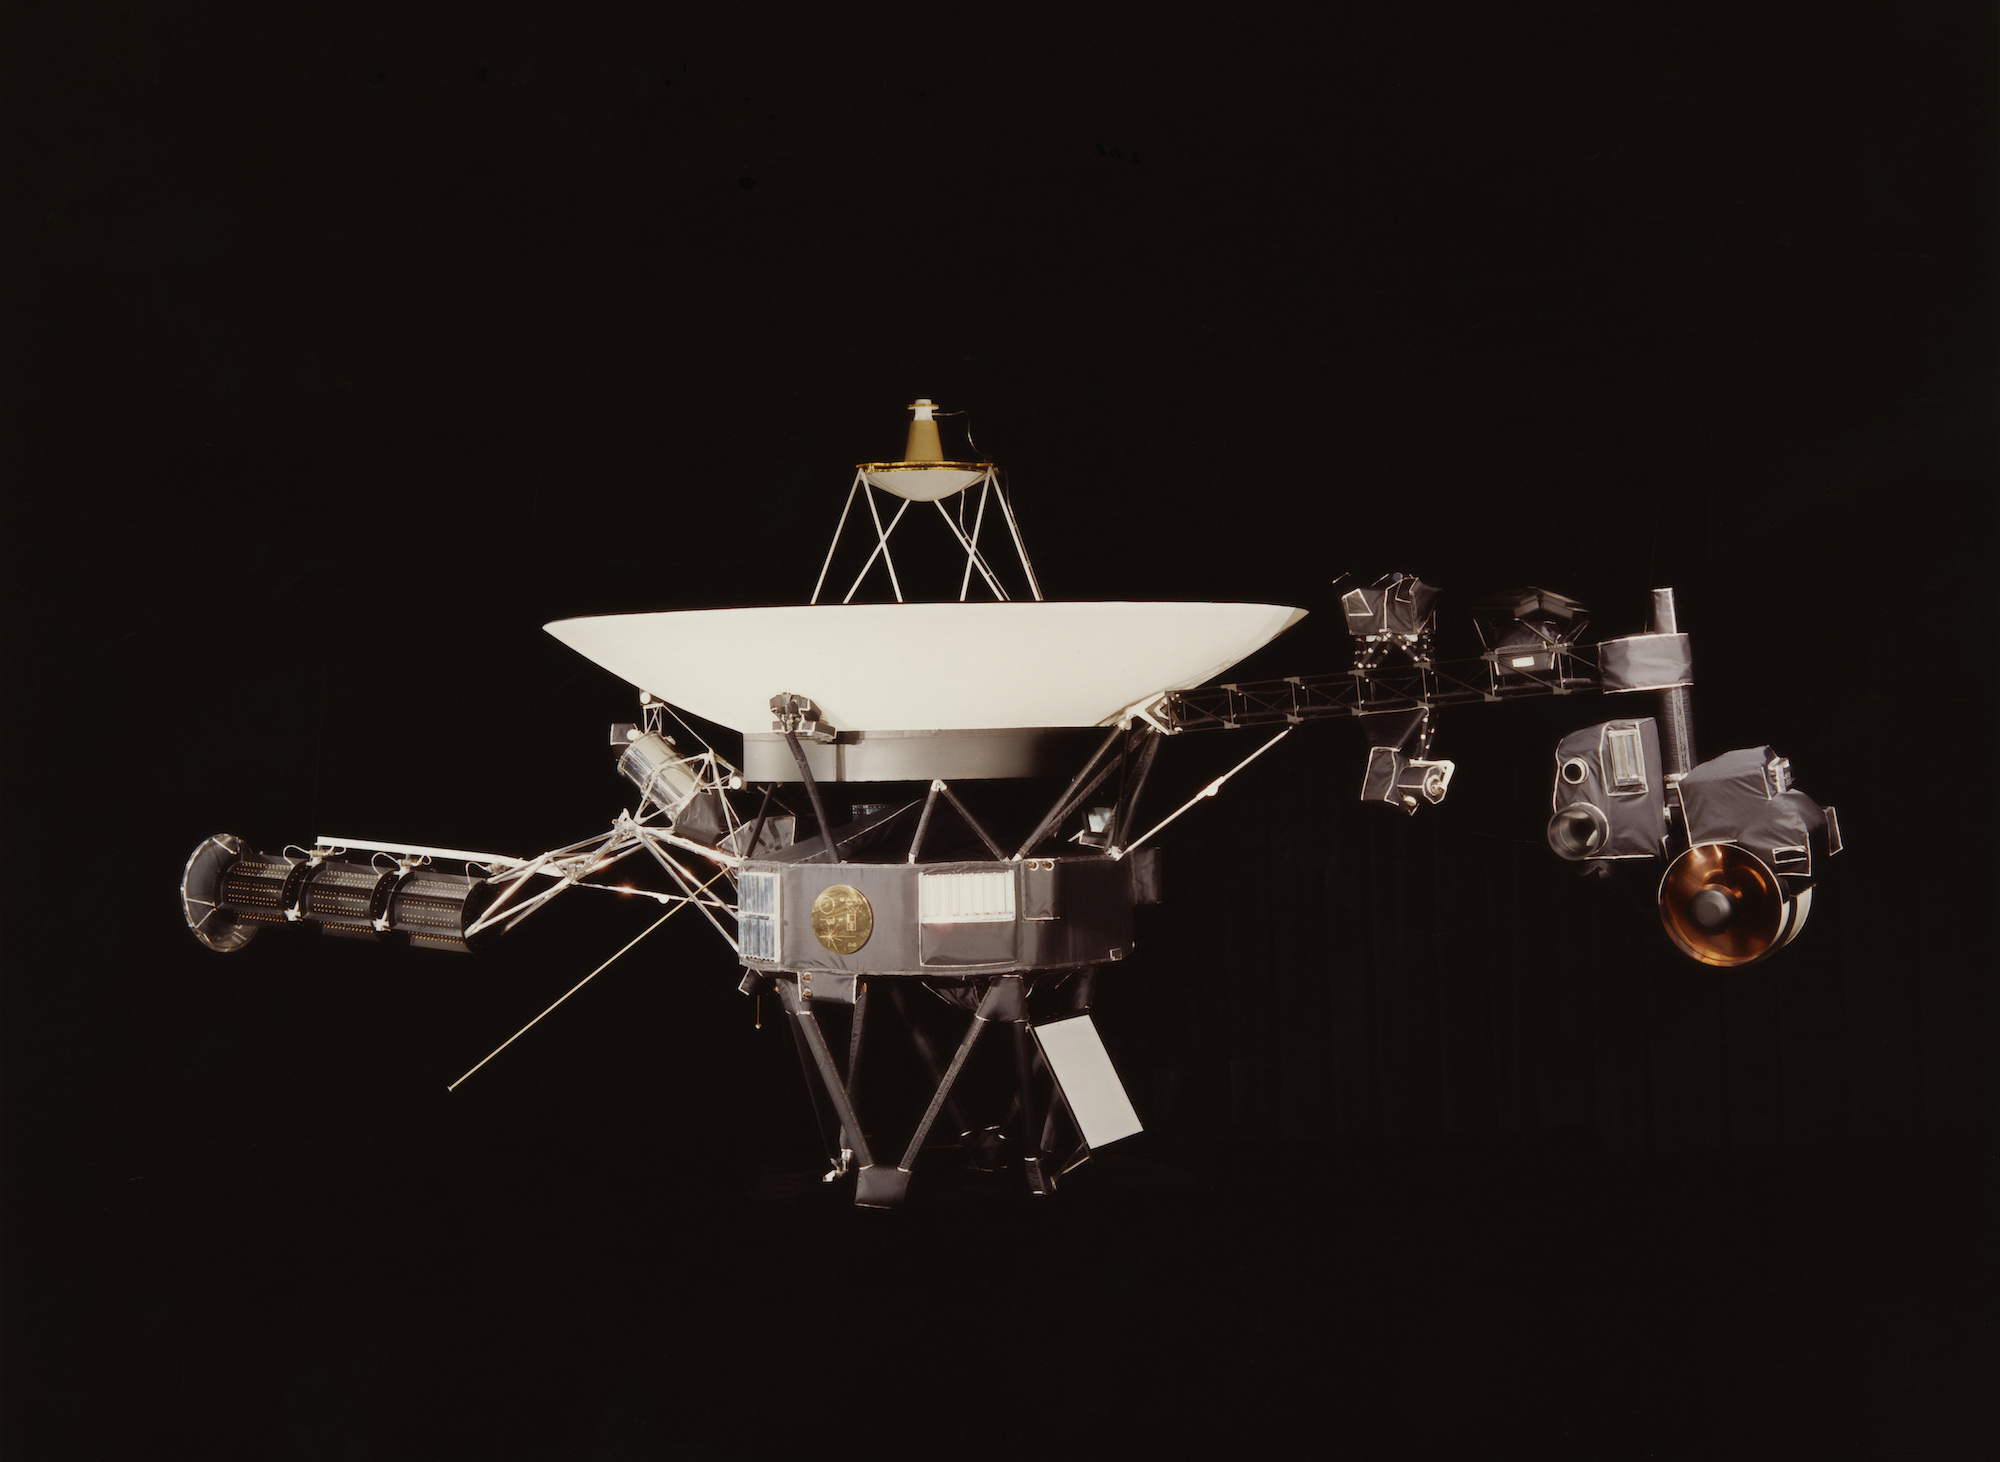 A NASA image of one of the Voyager space probes. Voyager 1 and its identical sister craft Voyager 2 were launched in 1977 to study the outer Solar System and eventually interstellar space. (Photo by NASA/Hulton Archive/Getty Images)